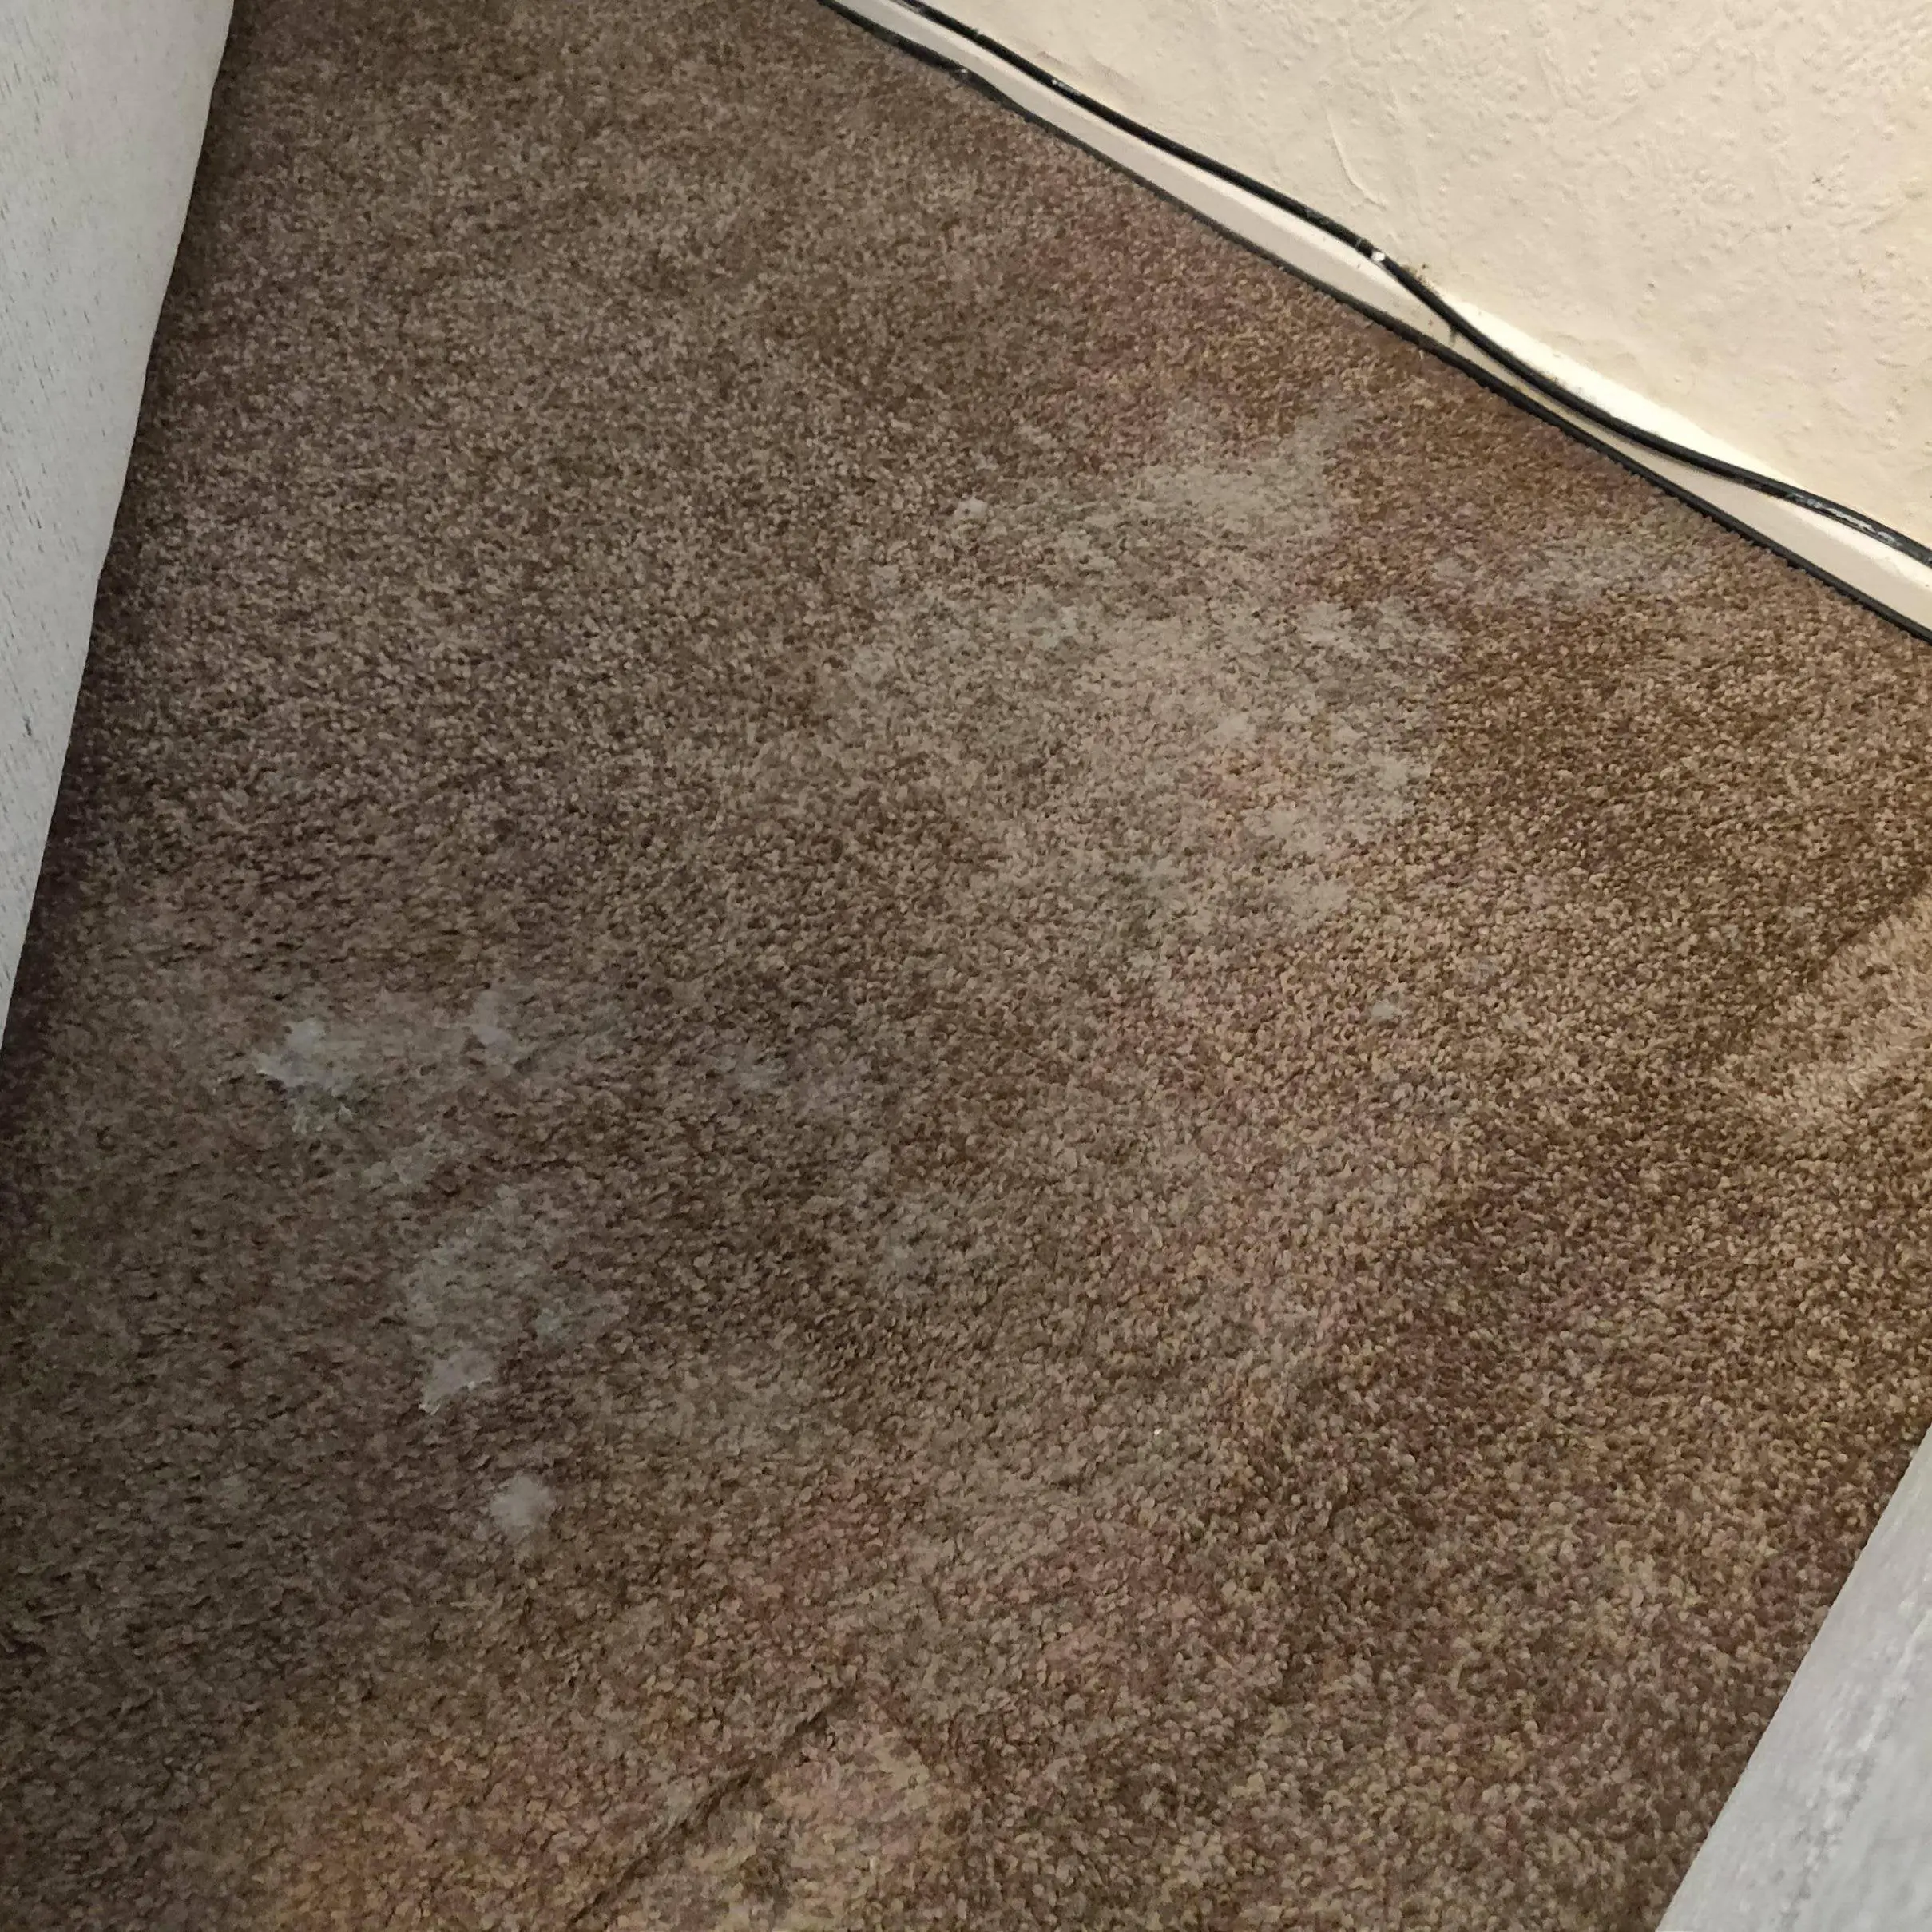 Is this mold on my Brother in laws Carpet? Carpet feels wet once it